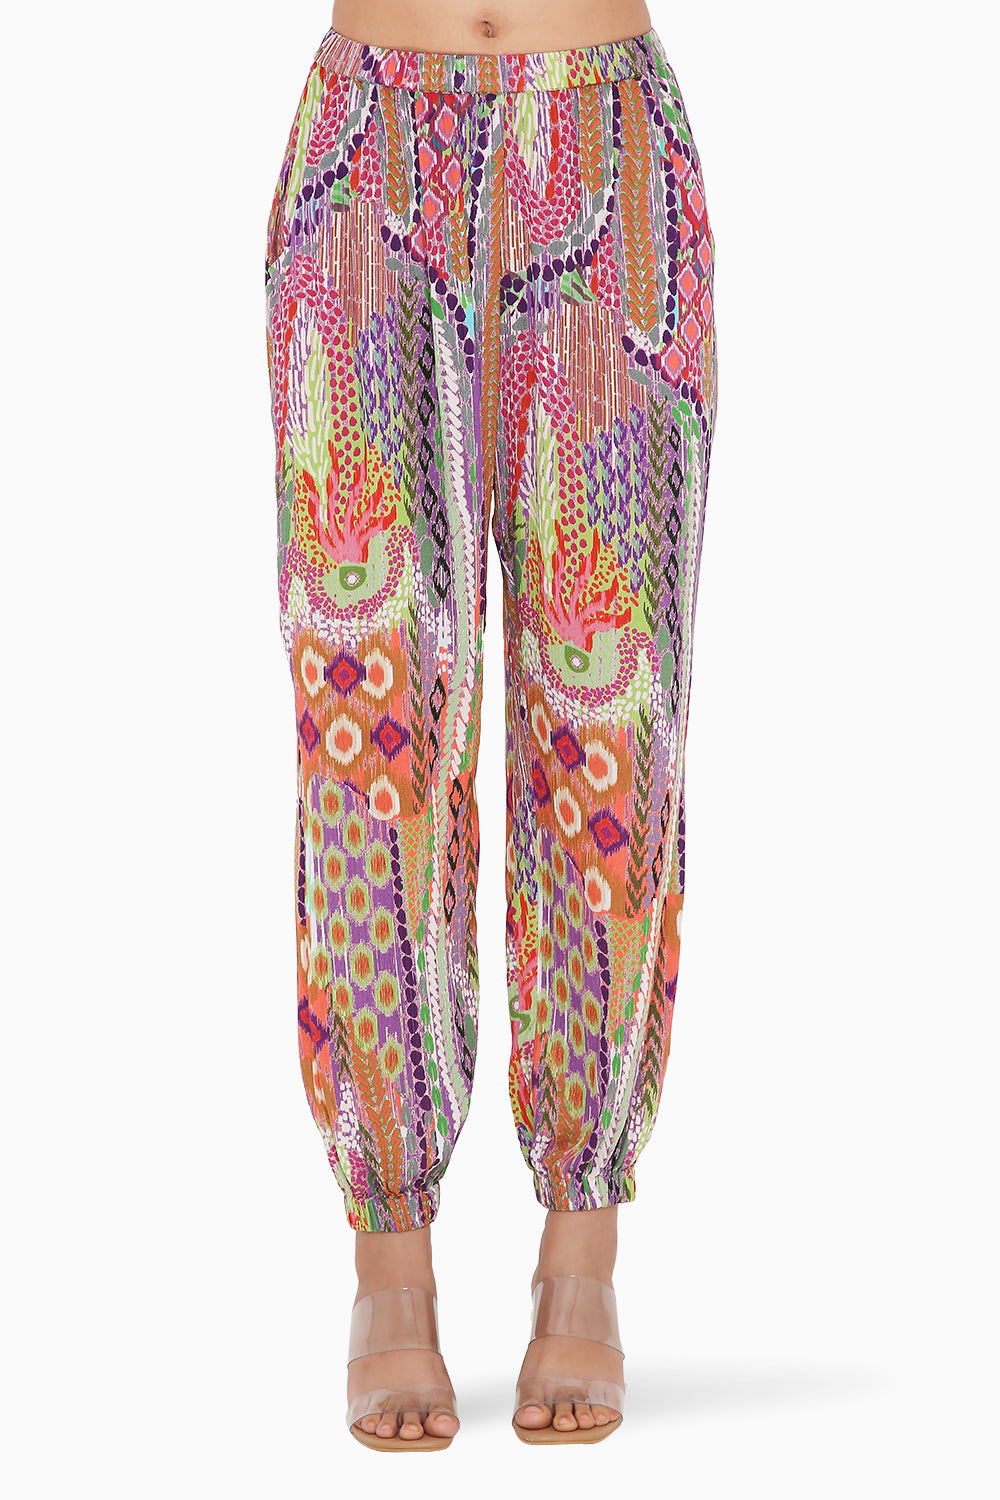 Multicolour African Print Wrinkle Top and Jogger Pants